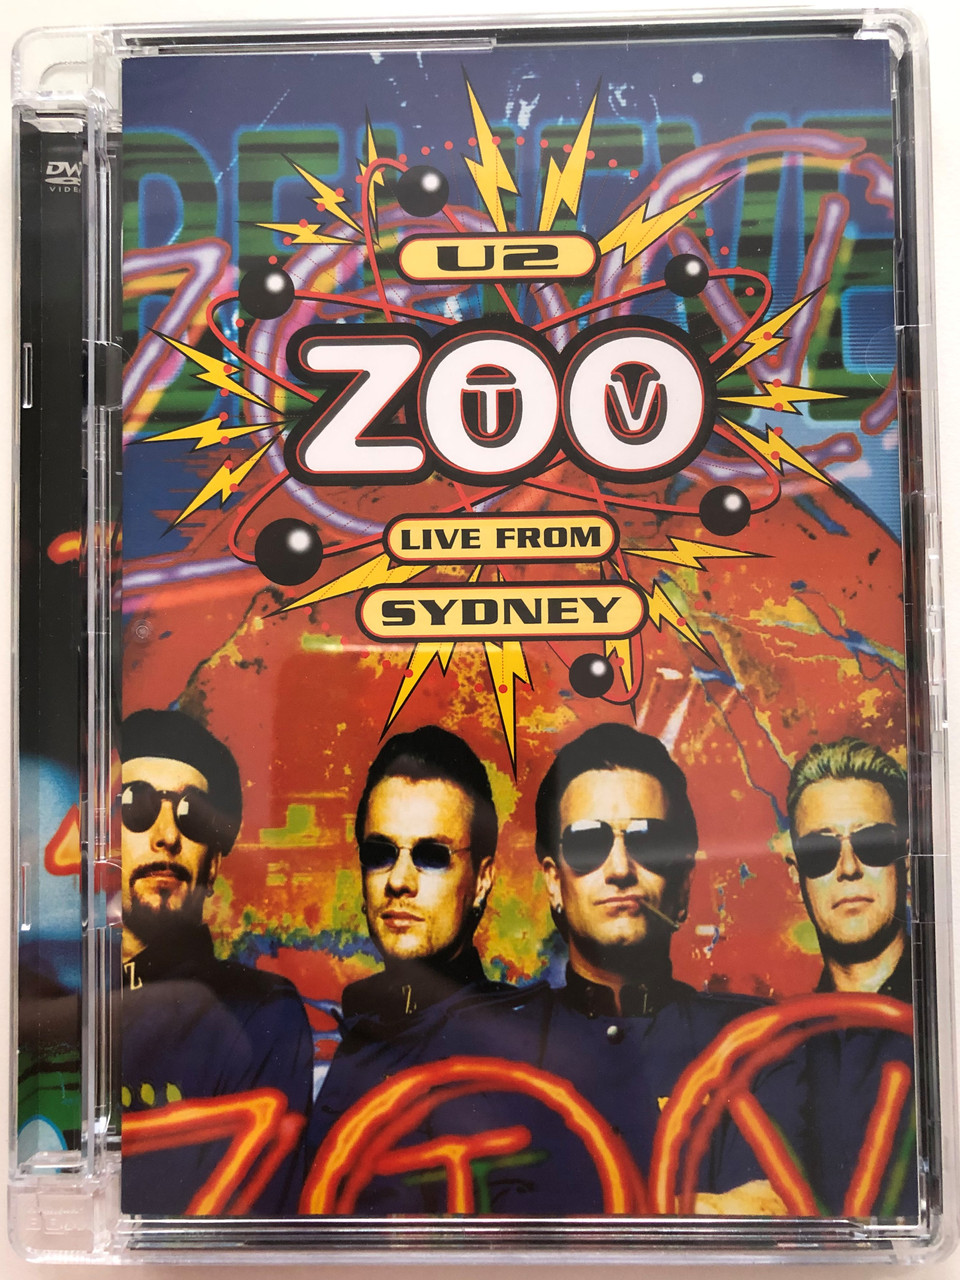 Musgo marioneta Materialismo U2 Zoo TV DVD 2006 Live from Sydney / Filmed on 27th November 1993 at the  Sydney Football Stadium, Sydney / Even better than the real thing, One,  Pride, With or Without you - bibleinmylanguage